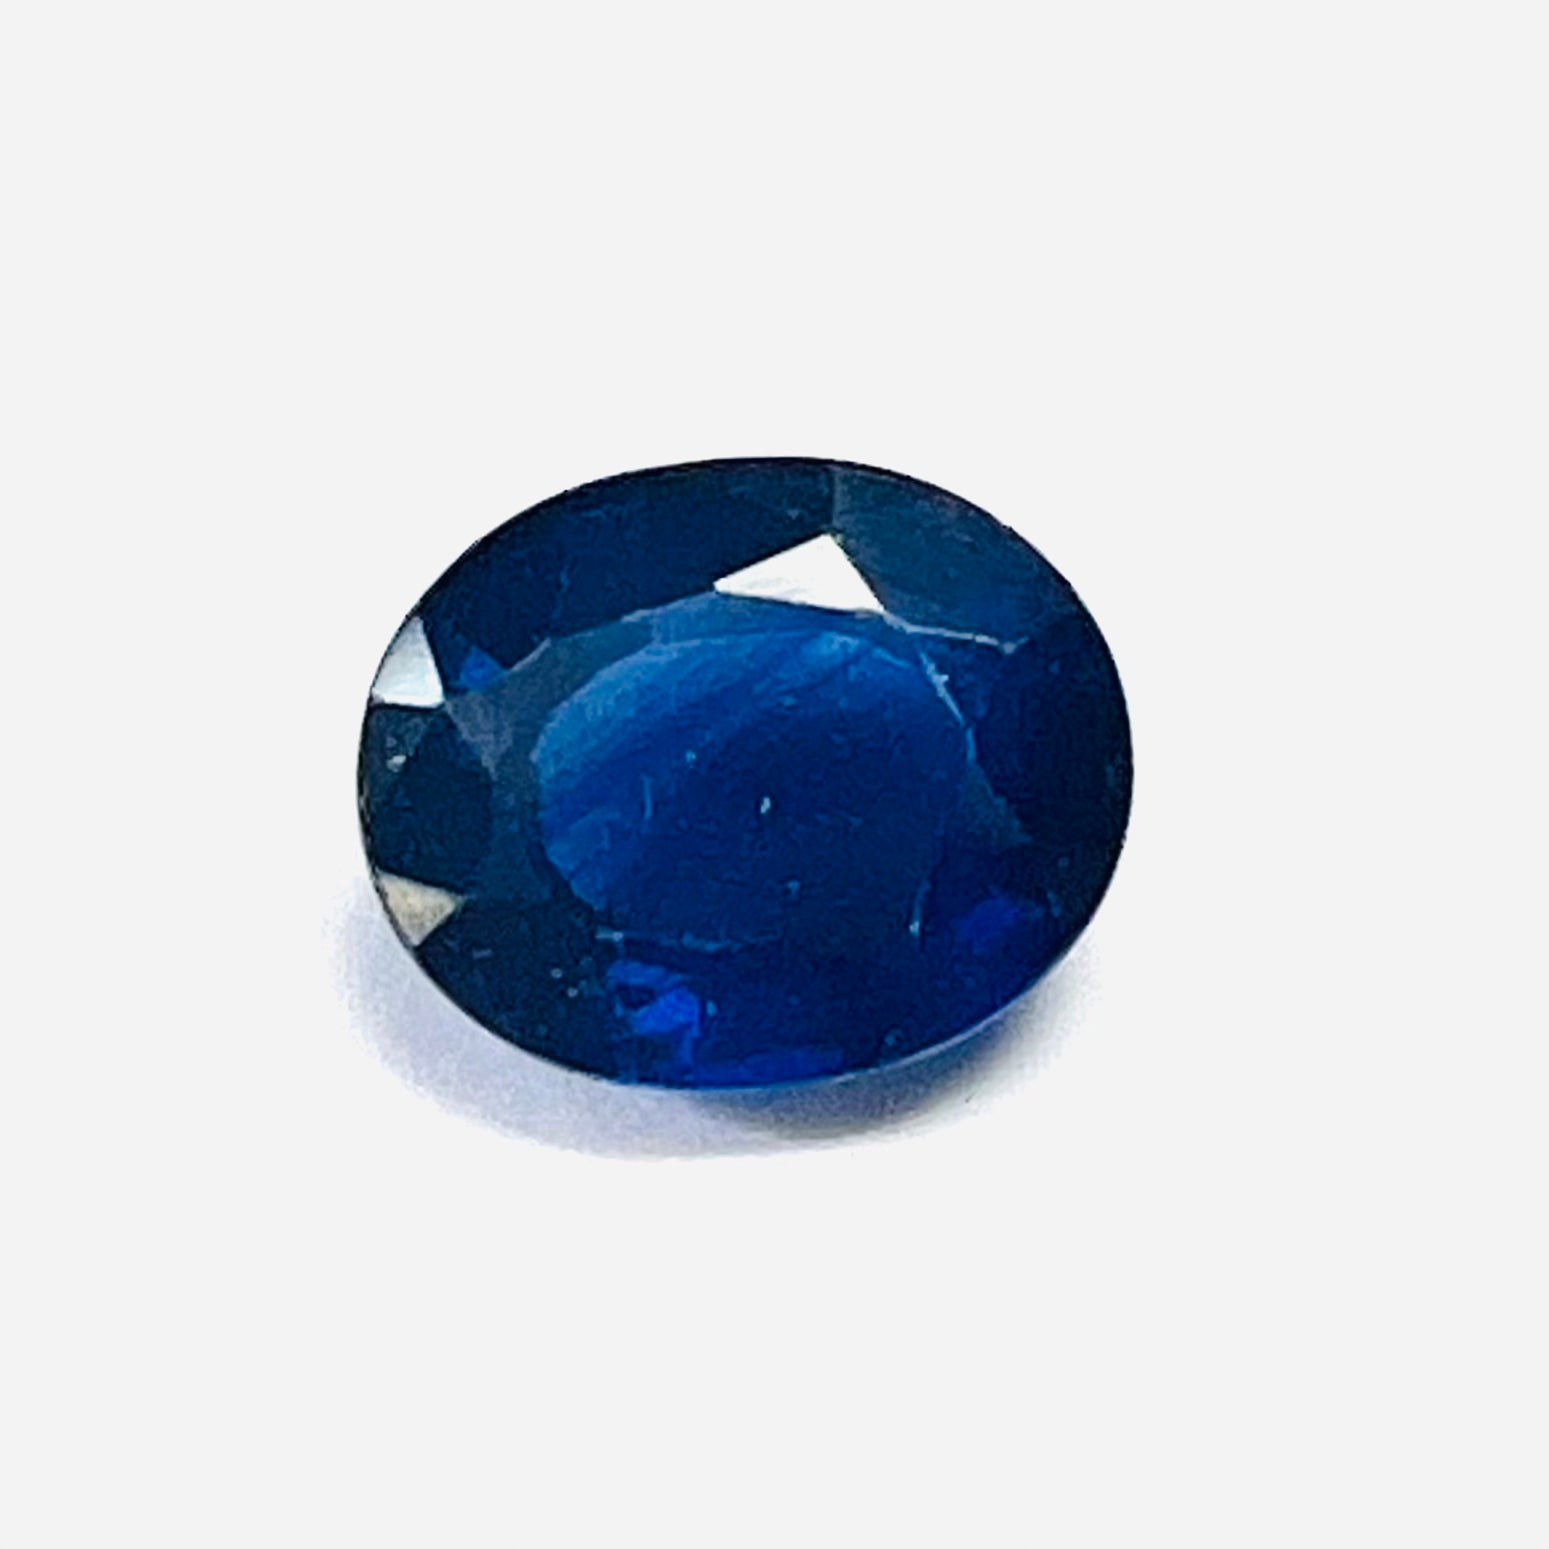 .84CTW Loose Oval Blue Sapphire 6.04x4.95x3.18mm Earth mined Gemstone